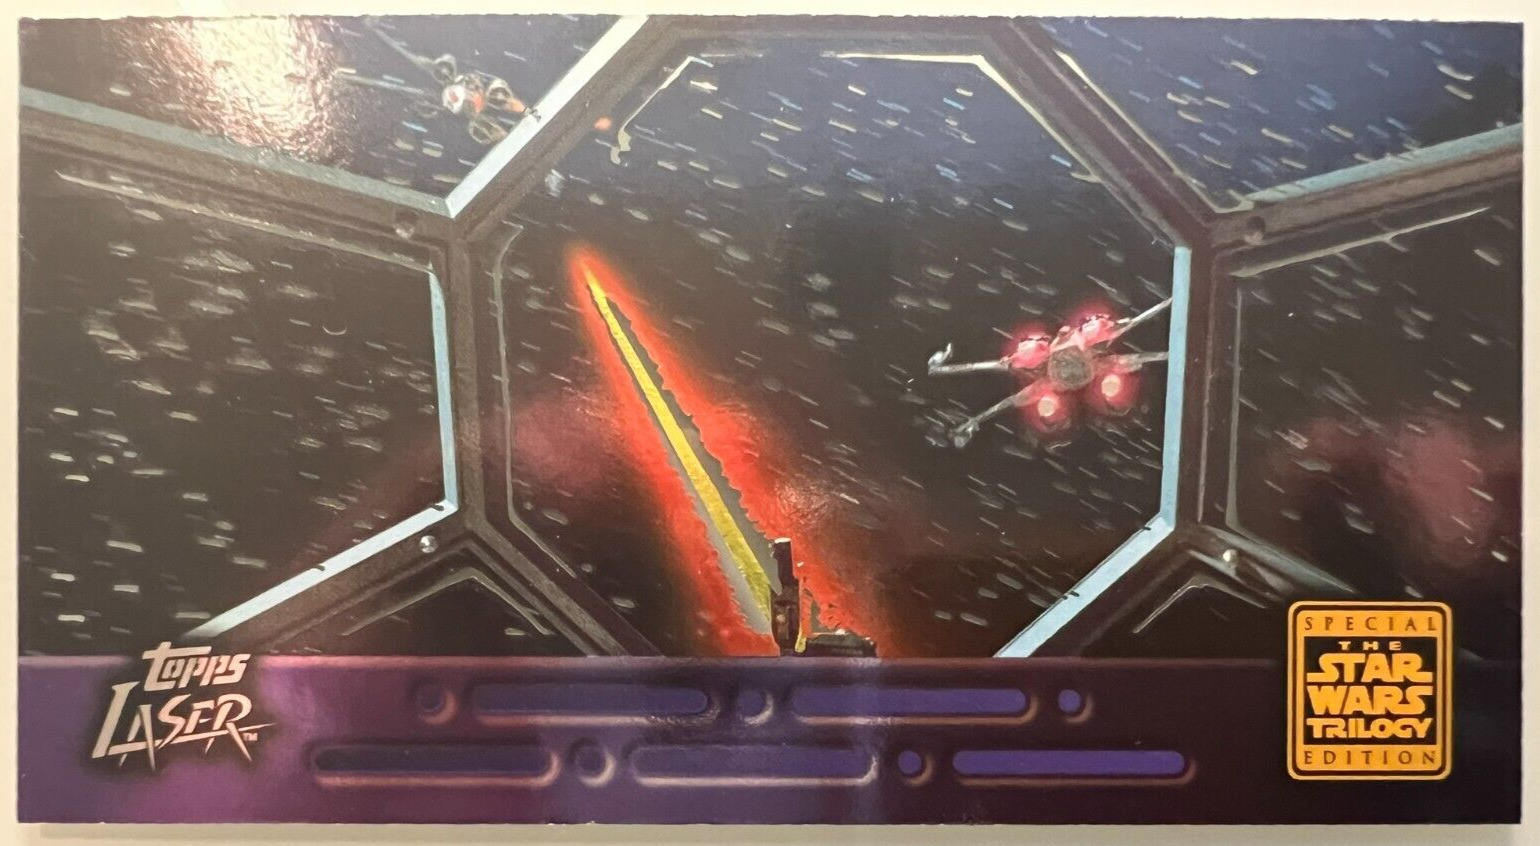 1997 Topps Laser Star Wars Trilogy Widevision Imperial View 6 of 6 (pack-fresh)